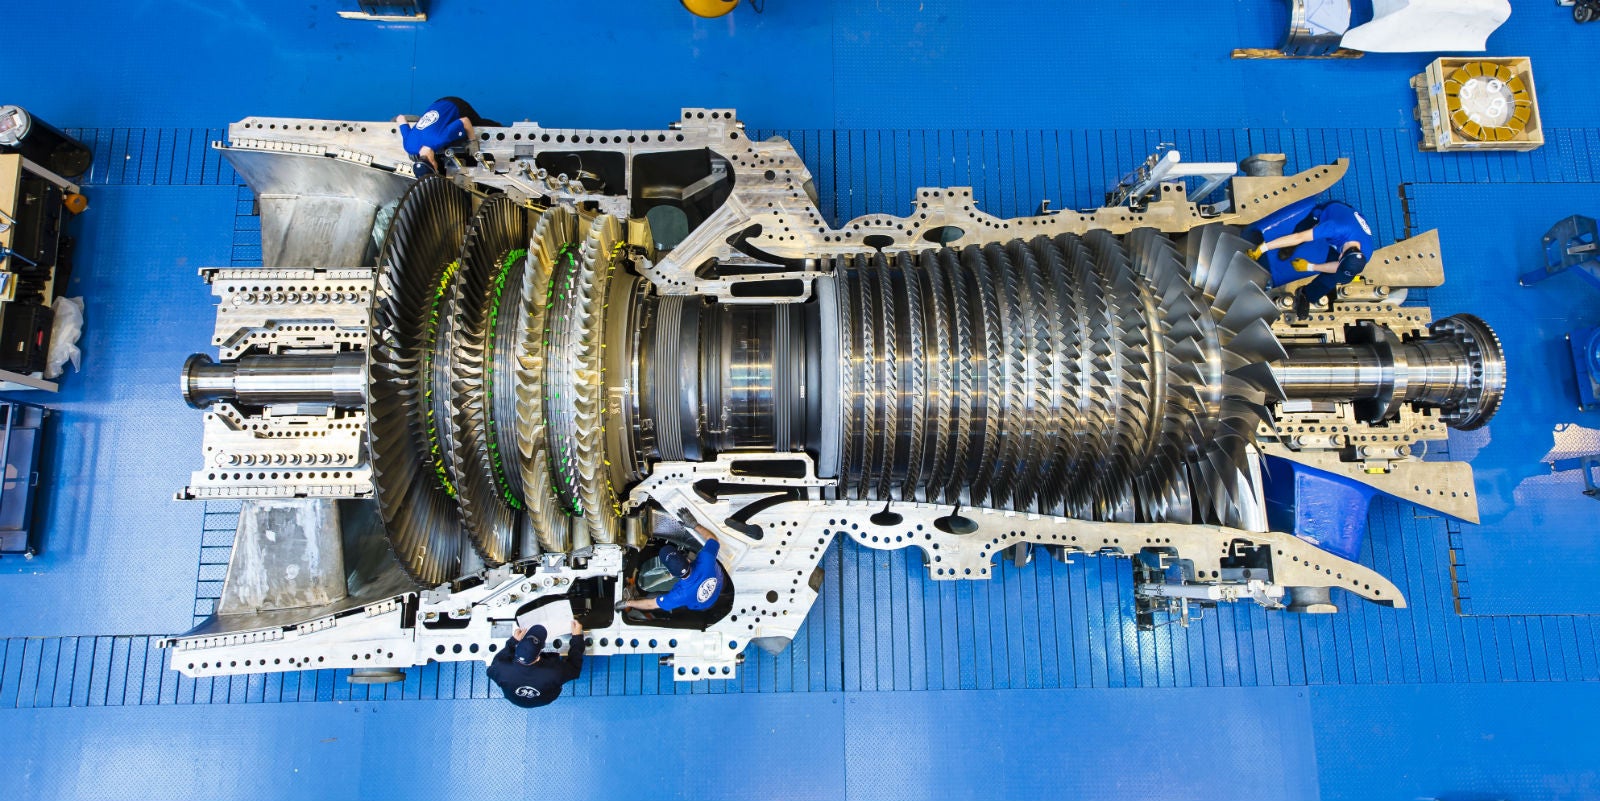 Monster Machines: The Worlds Biggest And Best Gas Turbine 